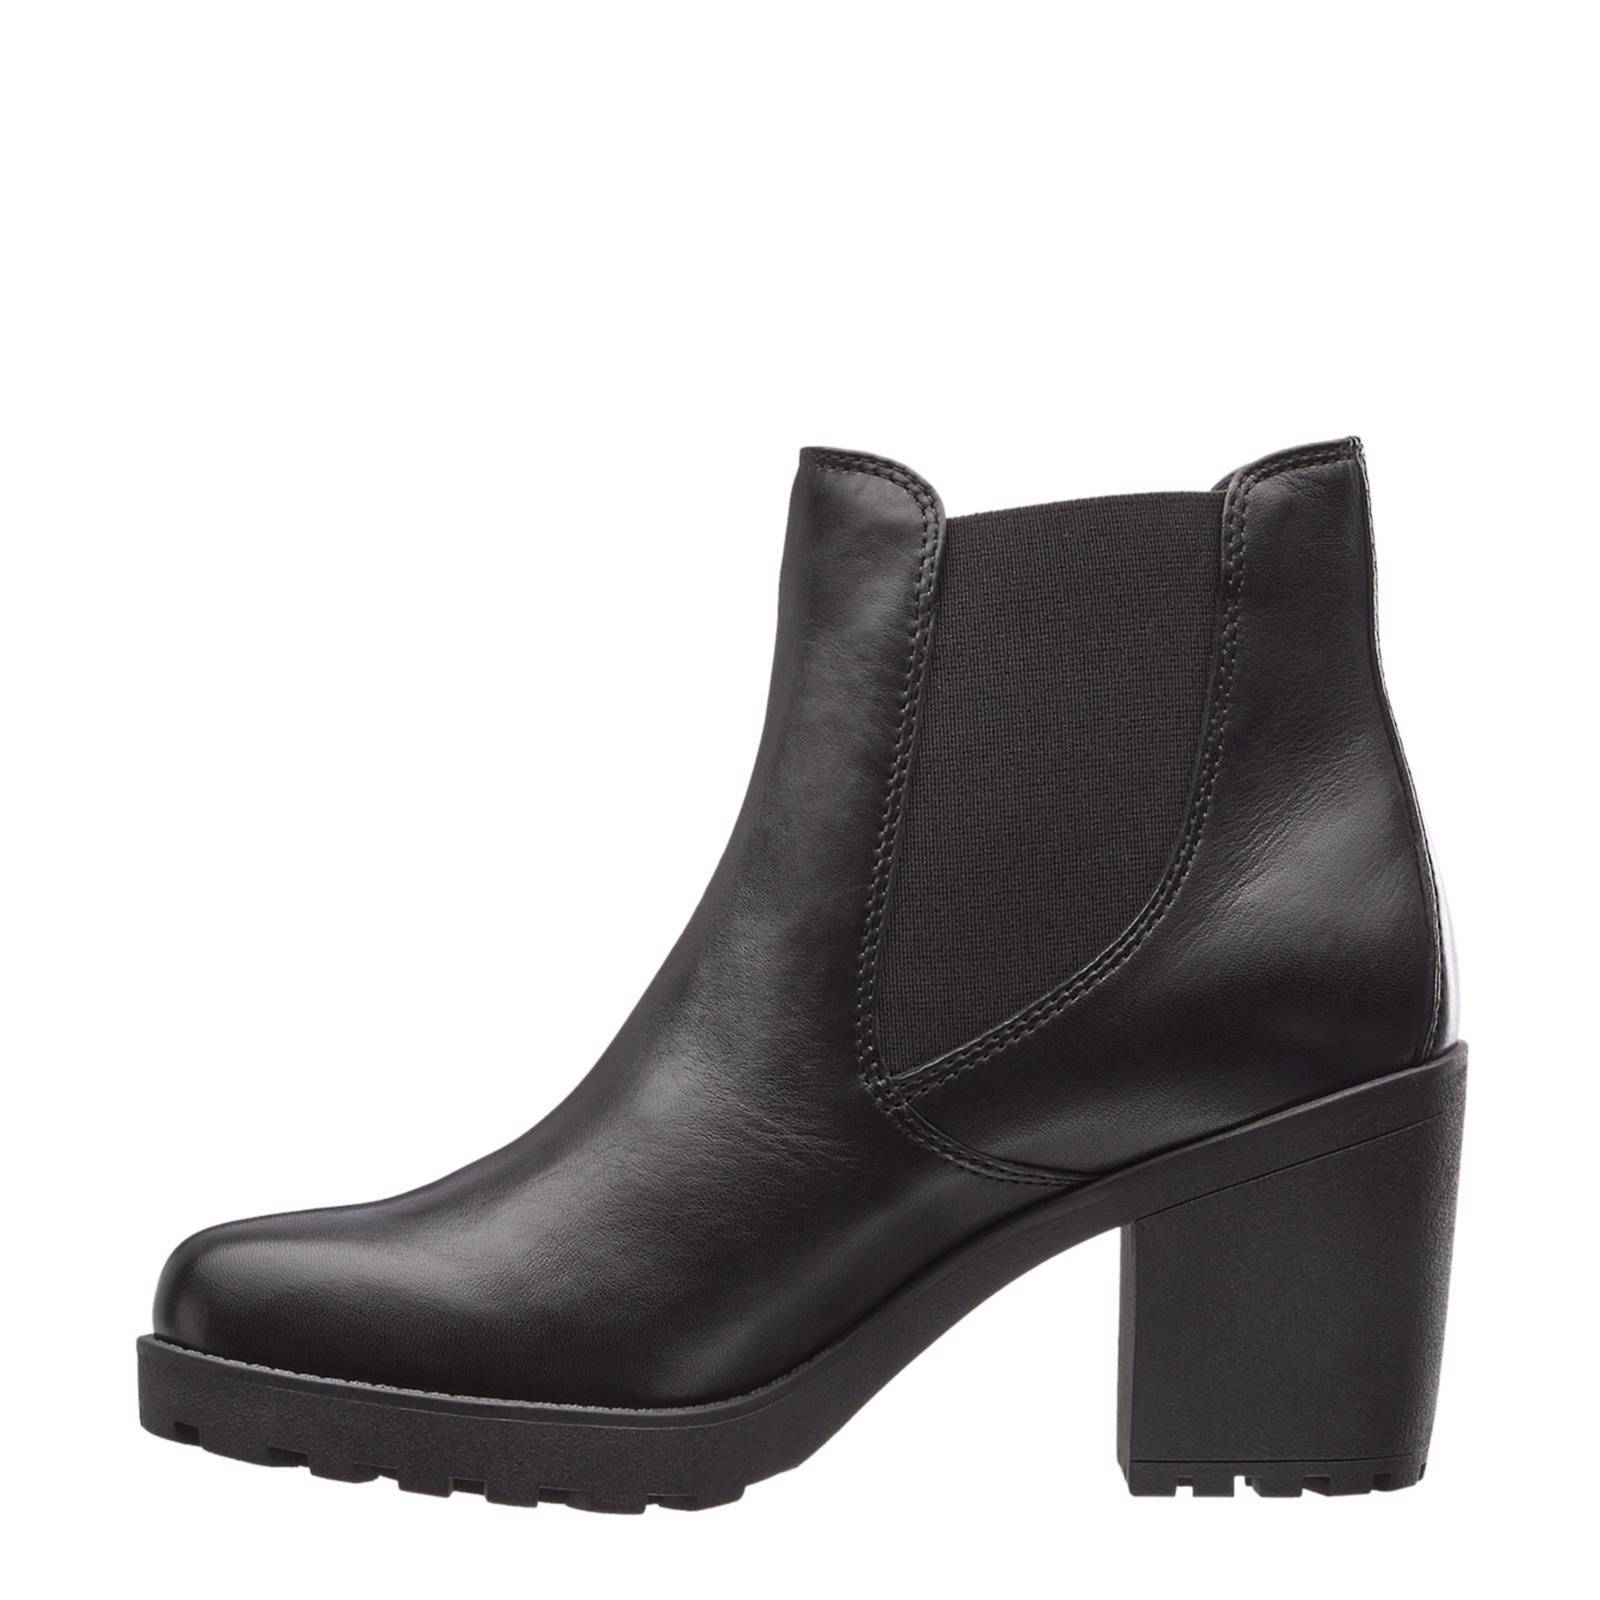 5th avenue chelsea boots